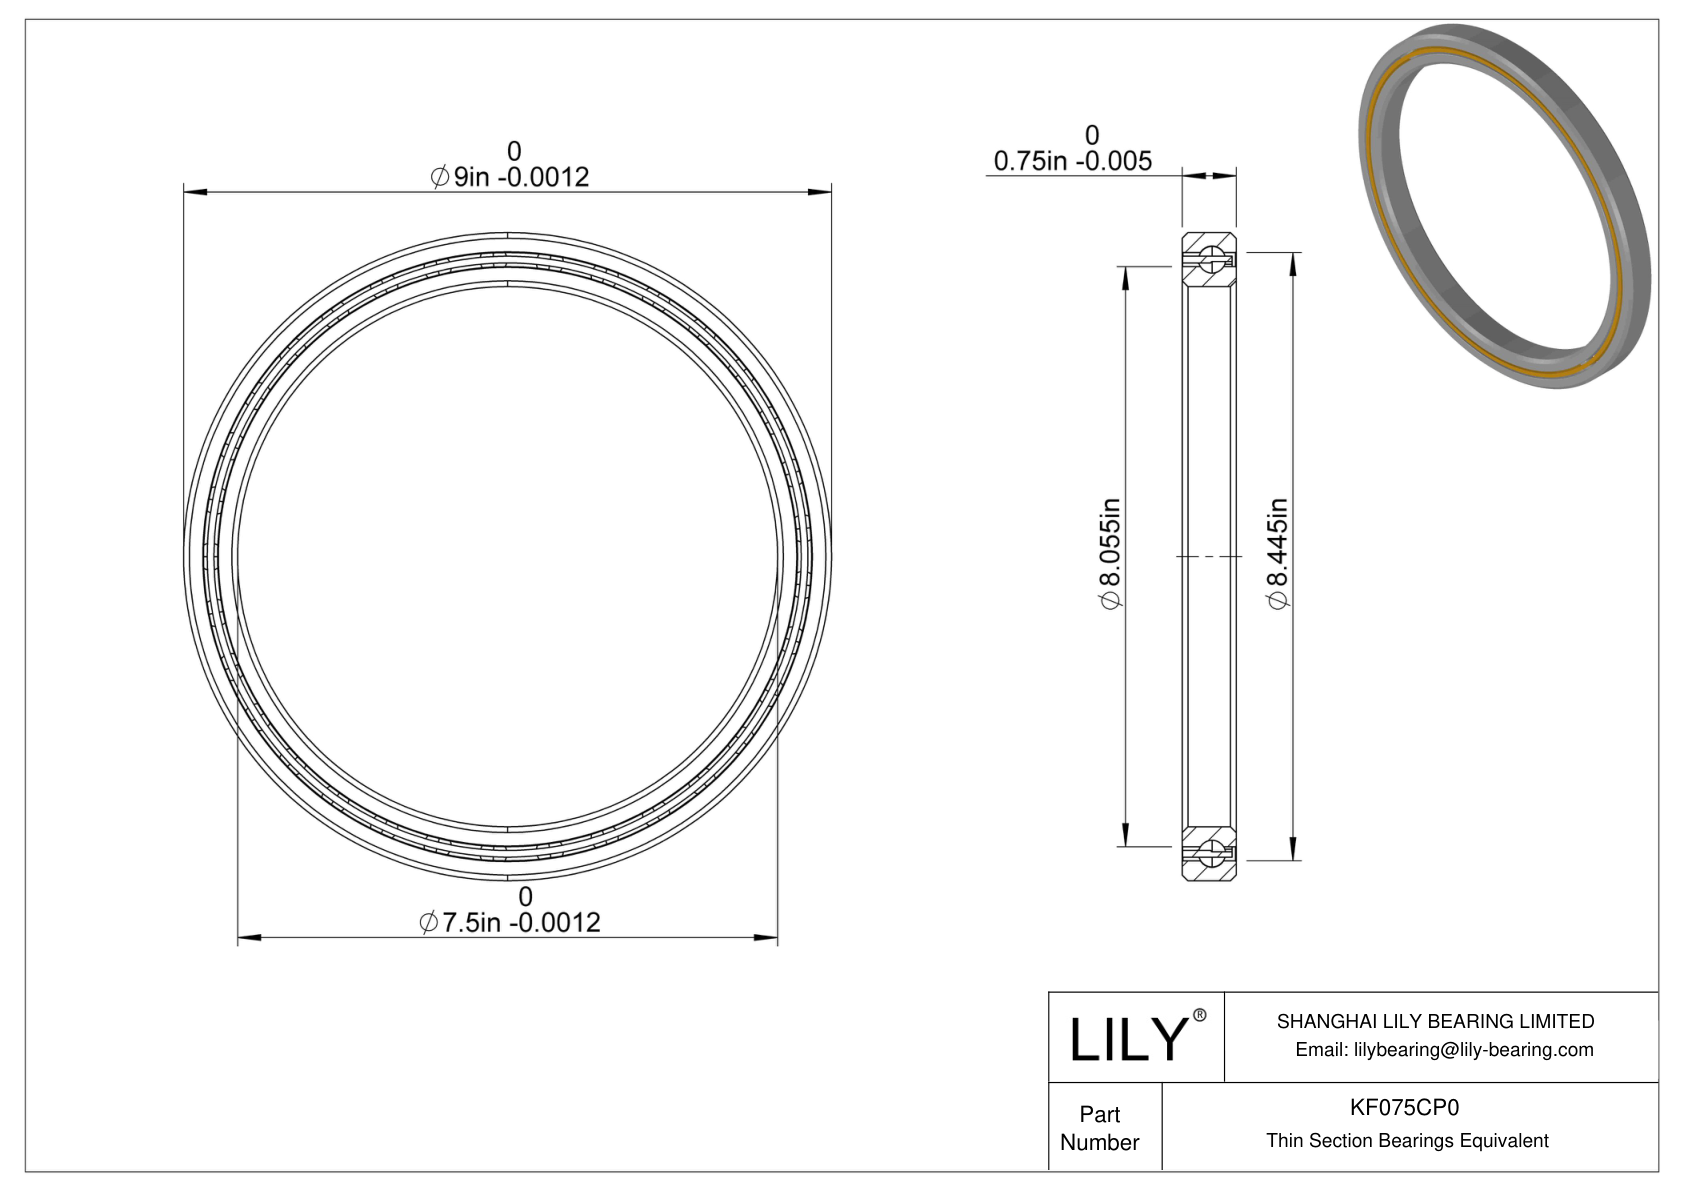 KF075CP0 Constant Section (CS) Bearings cad drawing